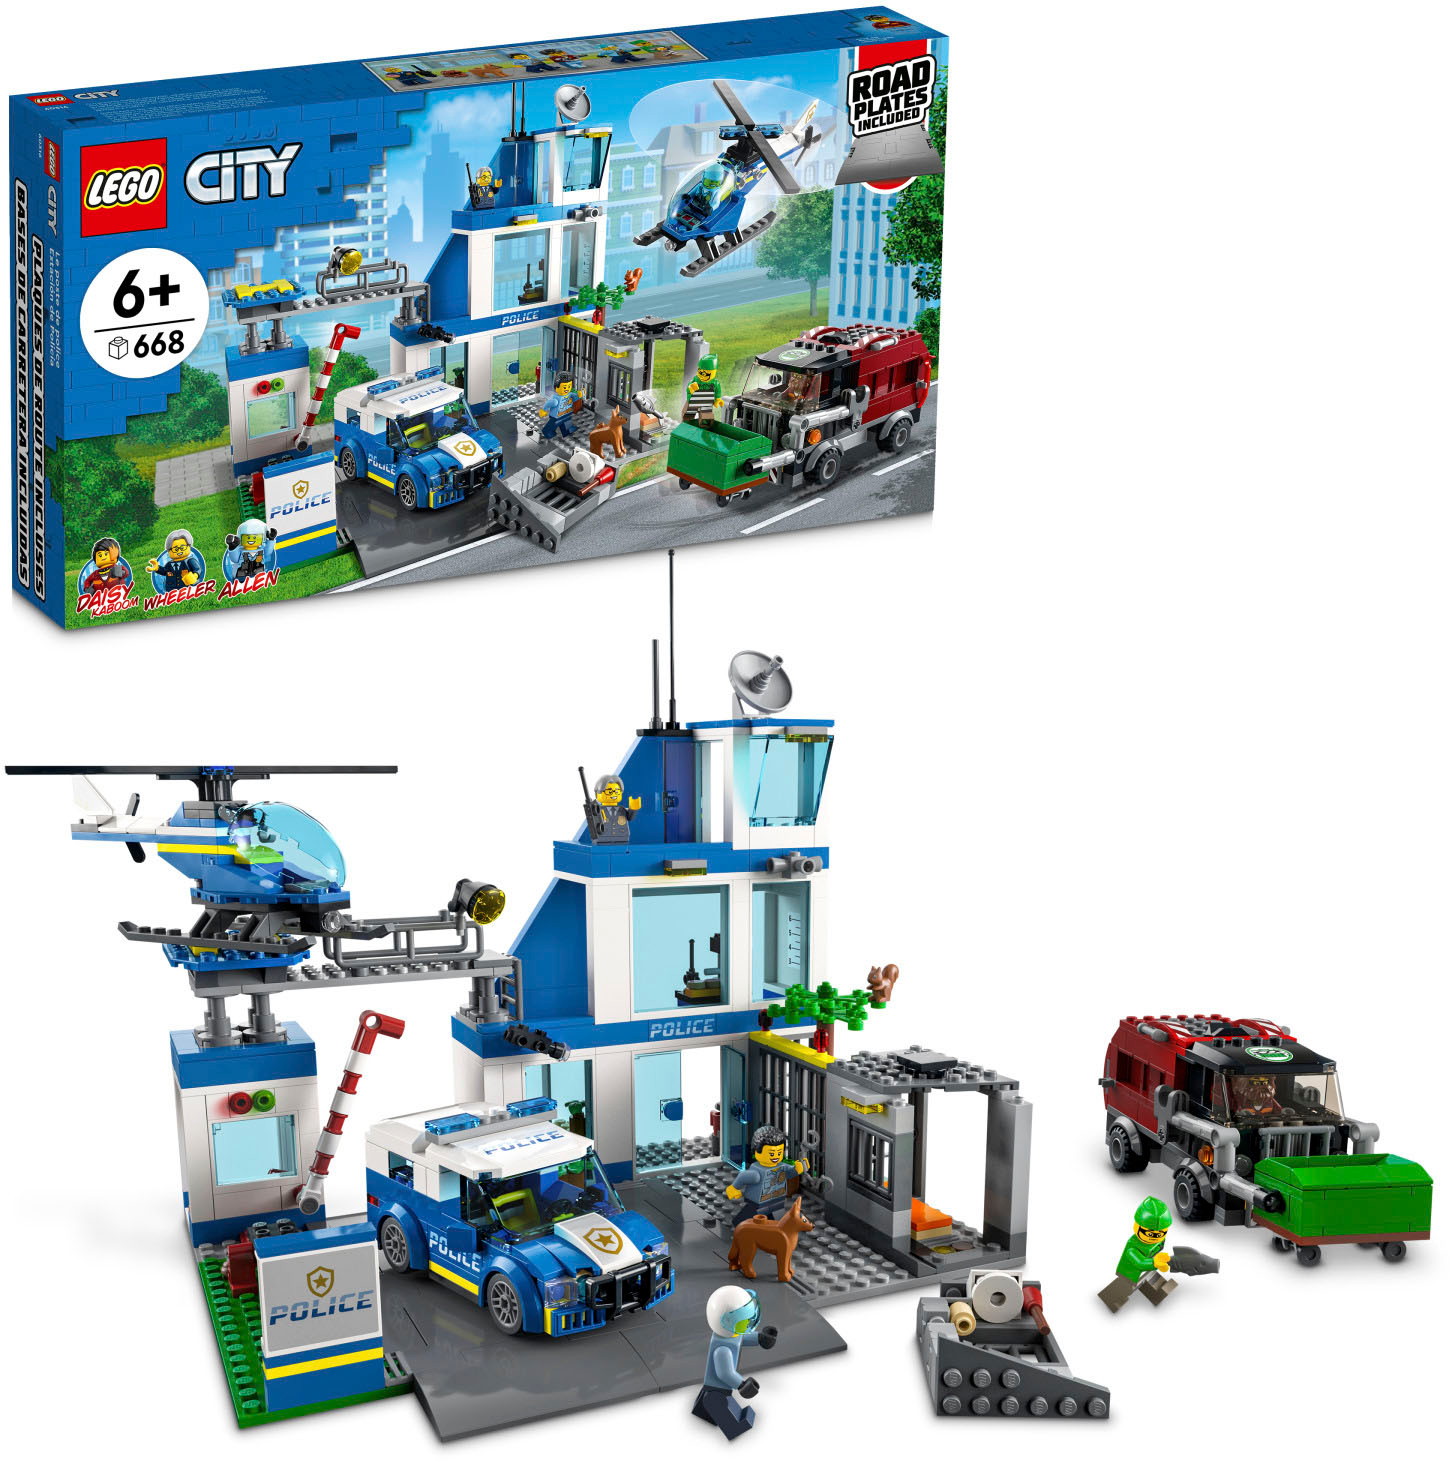 The best Lego City sets